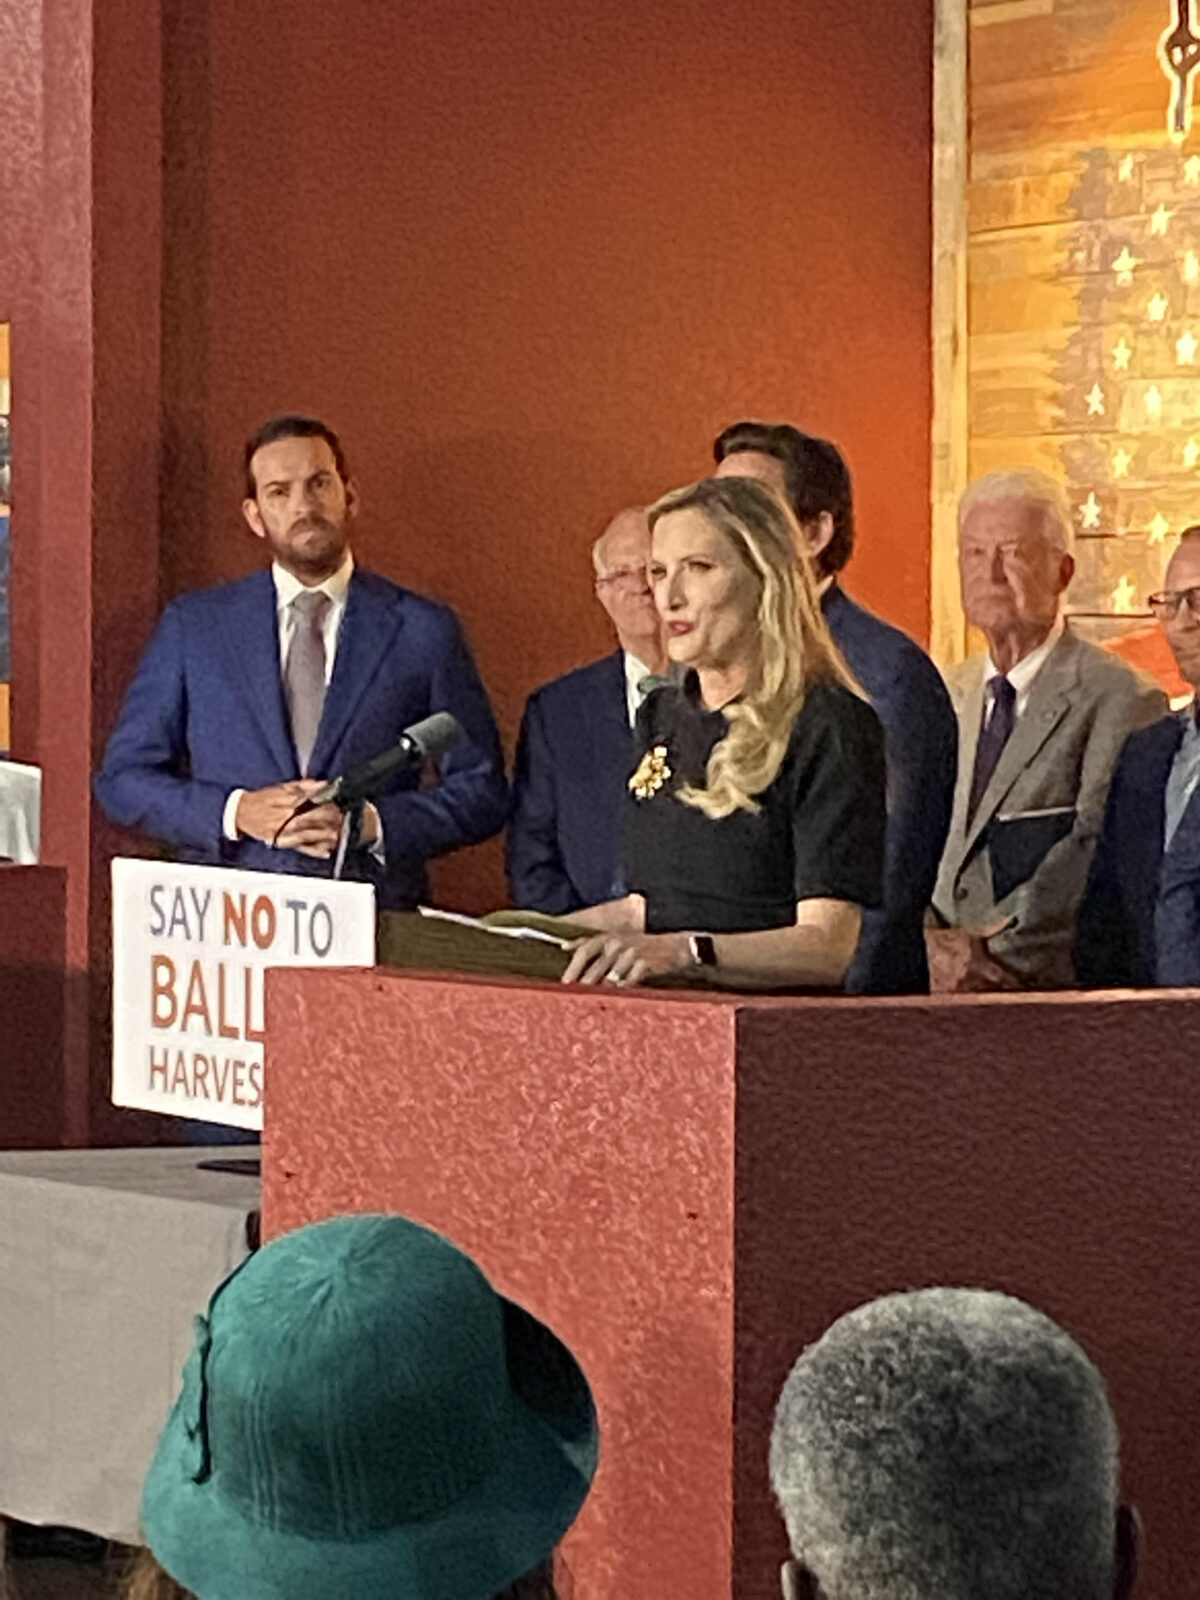 Florida Secretary of State Laurel Lee delivers comments during a press conference with Florida Governor Ron DeSantis in Spring Hill, Florida on April 25, 2022. 